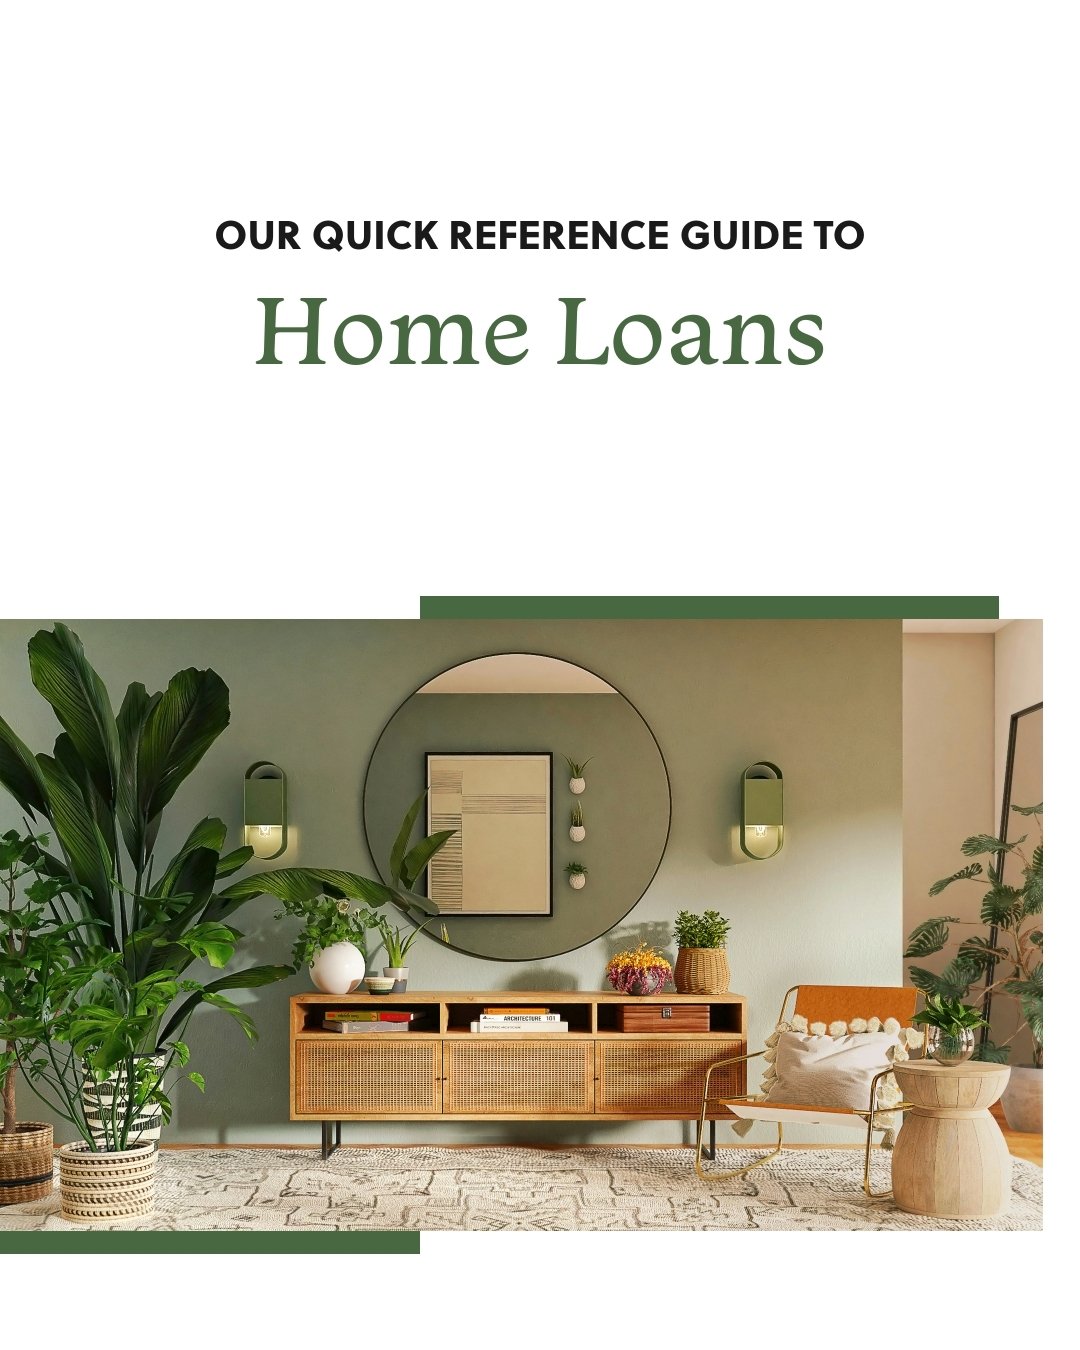 🔑 (Almost) Everything You Need to Know About Getting a Home Loan

Navigating the world of home financing can be complex, but you don&rsquo;t have to do it alone. Hopefully, this info can help demystify the different types of mortgages available, how